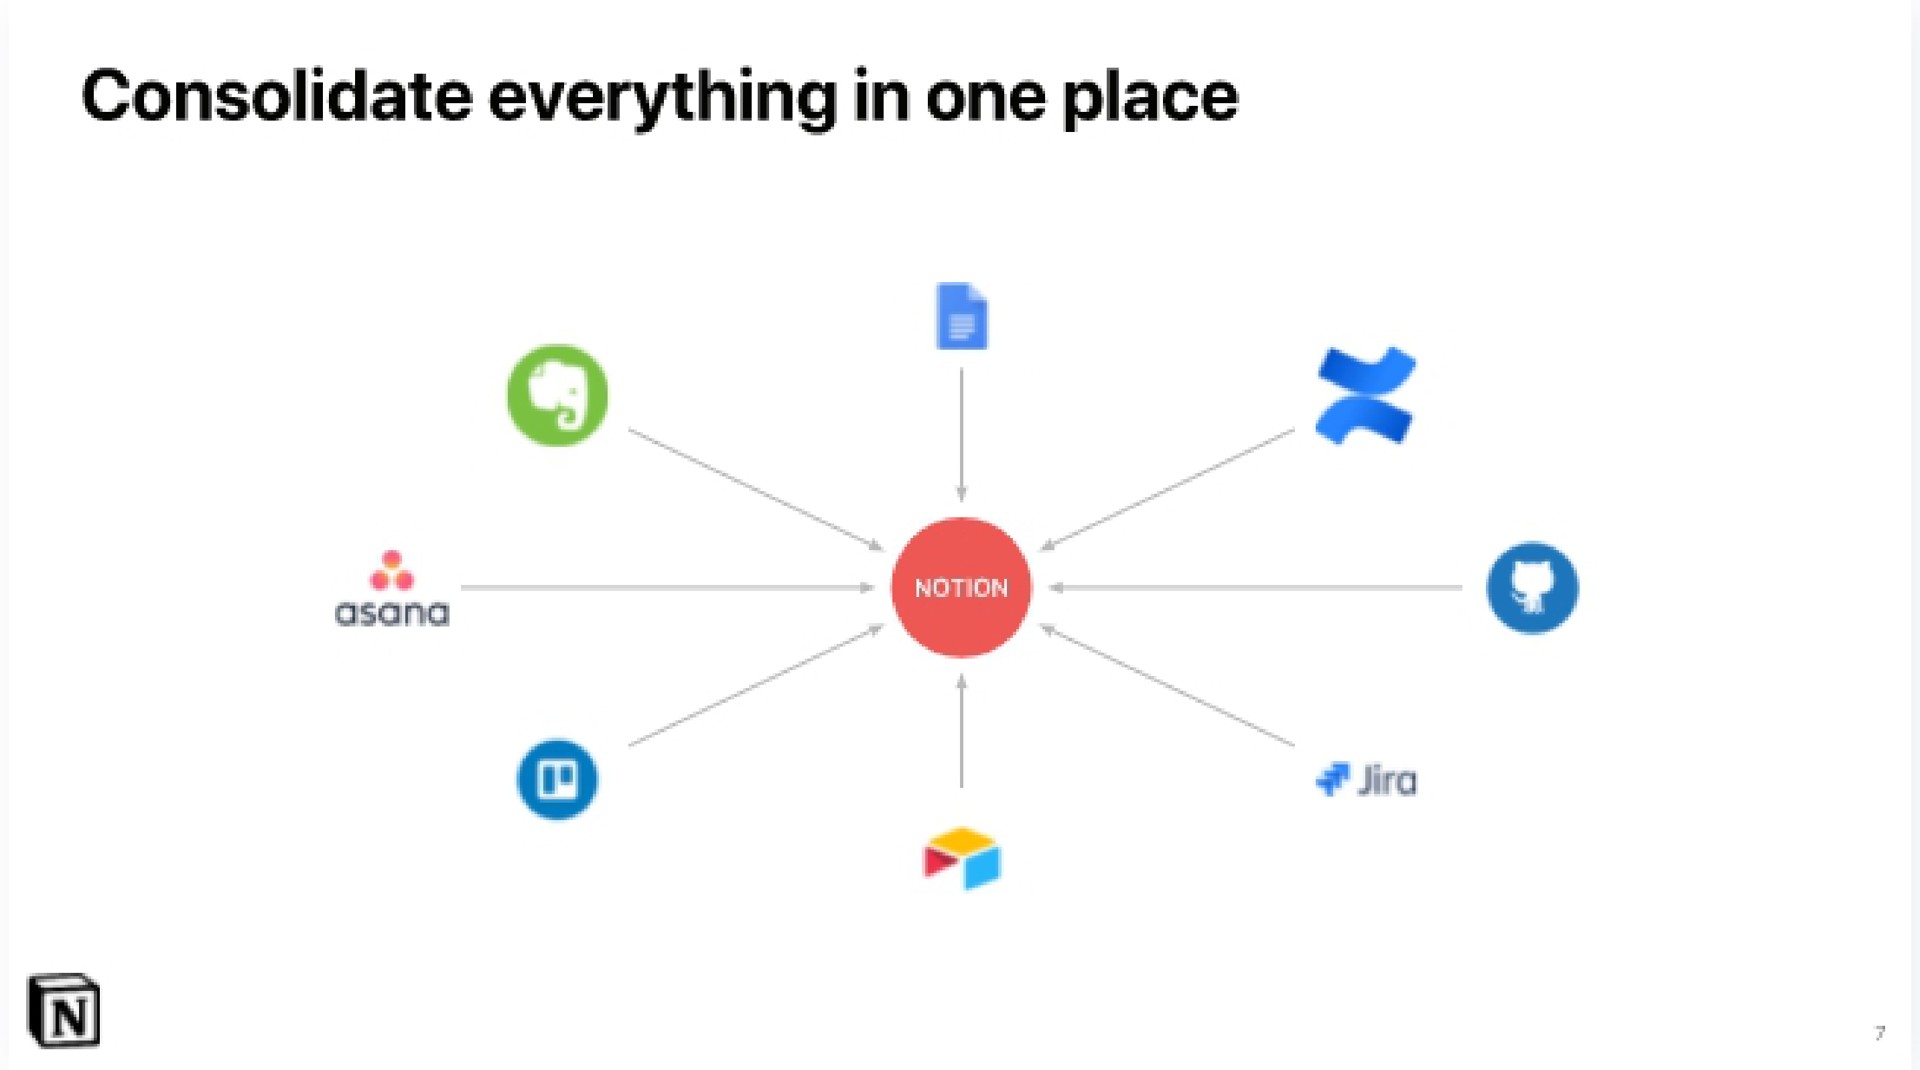 consolidate everything in one place | Notion